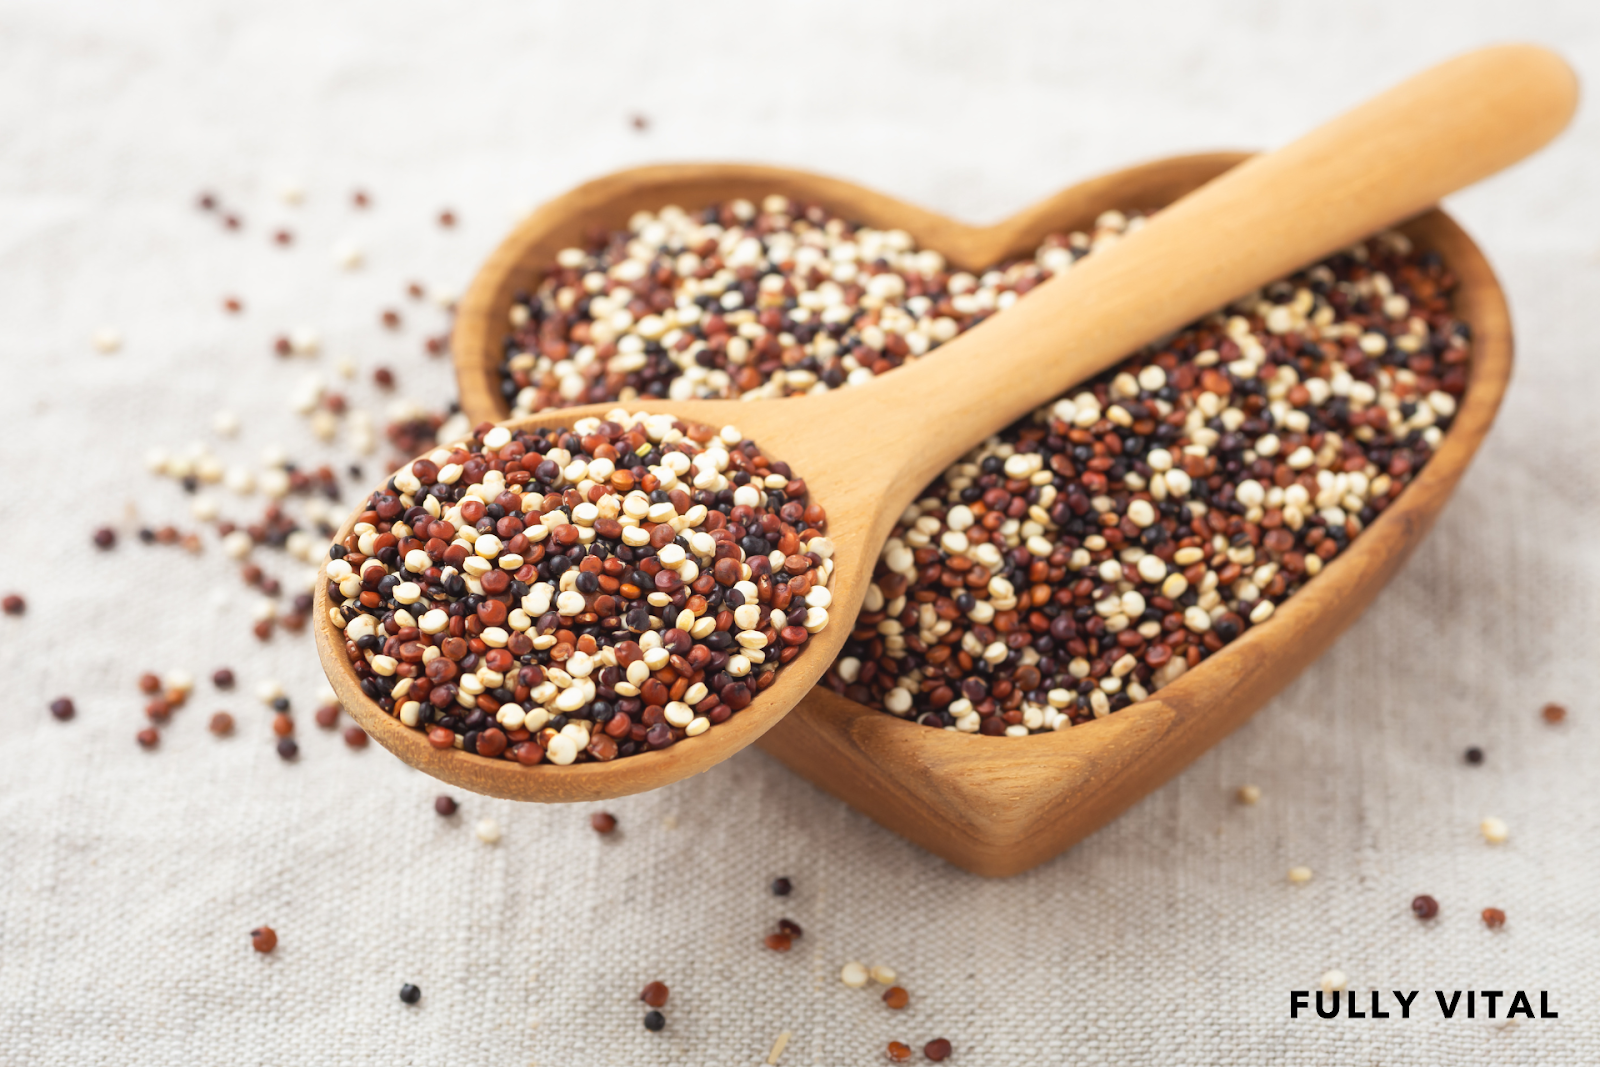 Quinoa Extract: The Protein Punch Your Hair Needs